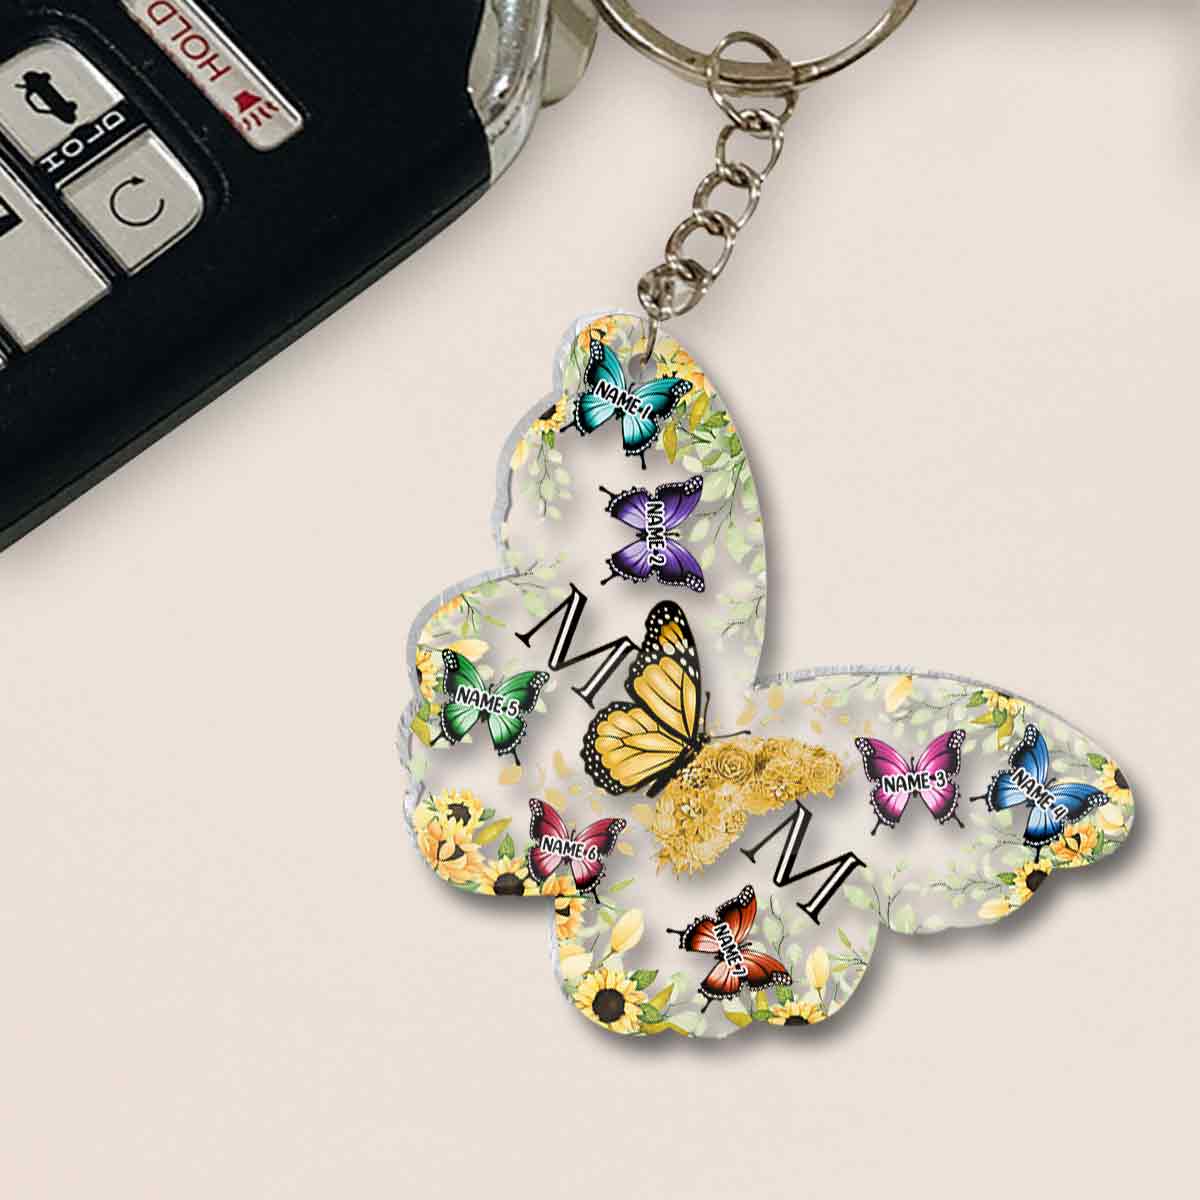 Mom Butterfly - Personalized Mother Transparent Transparent Keychain